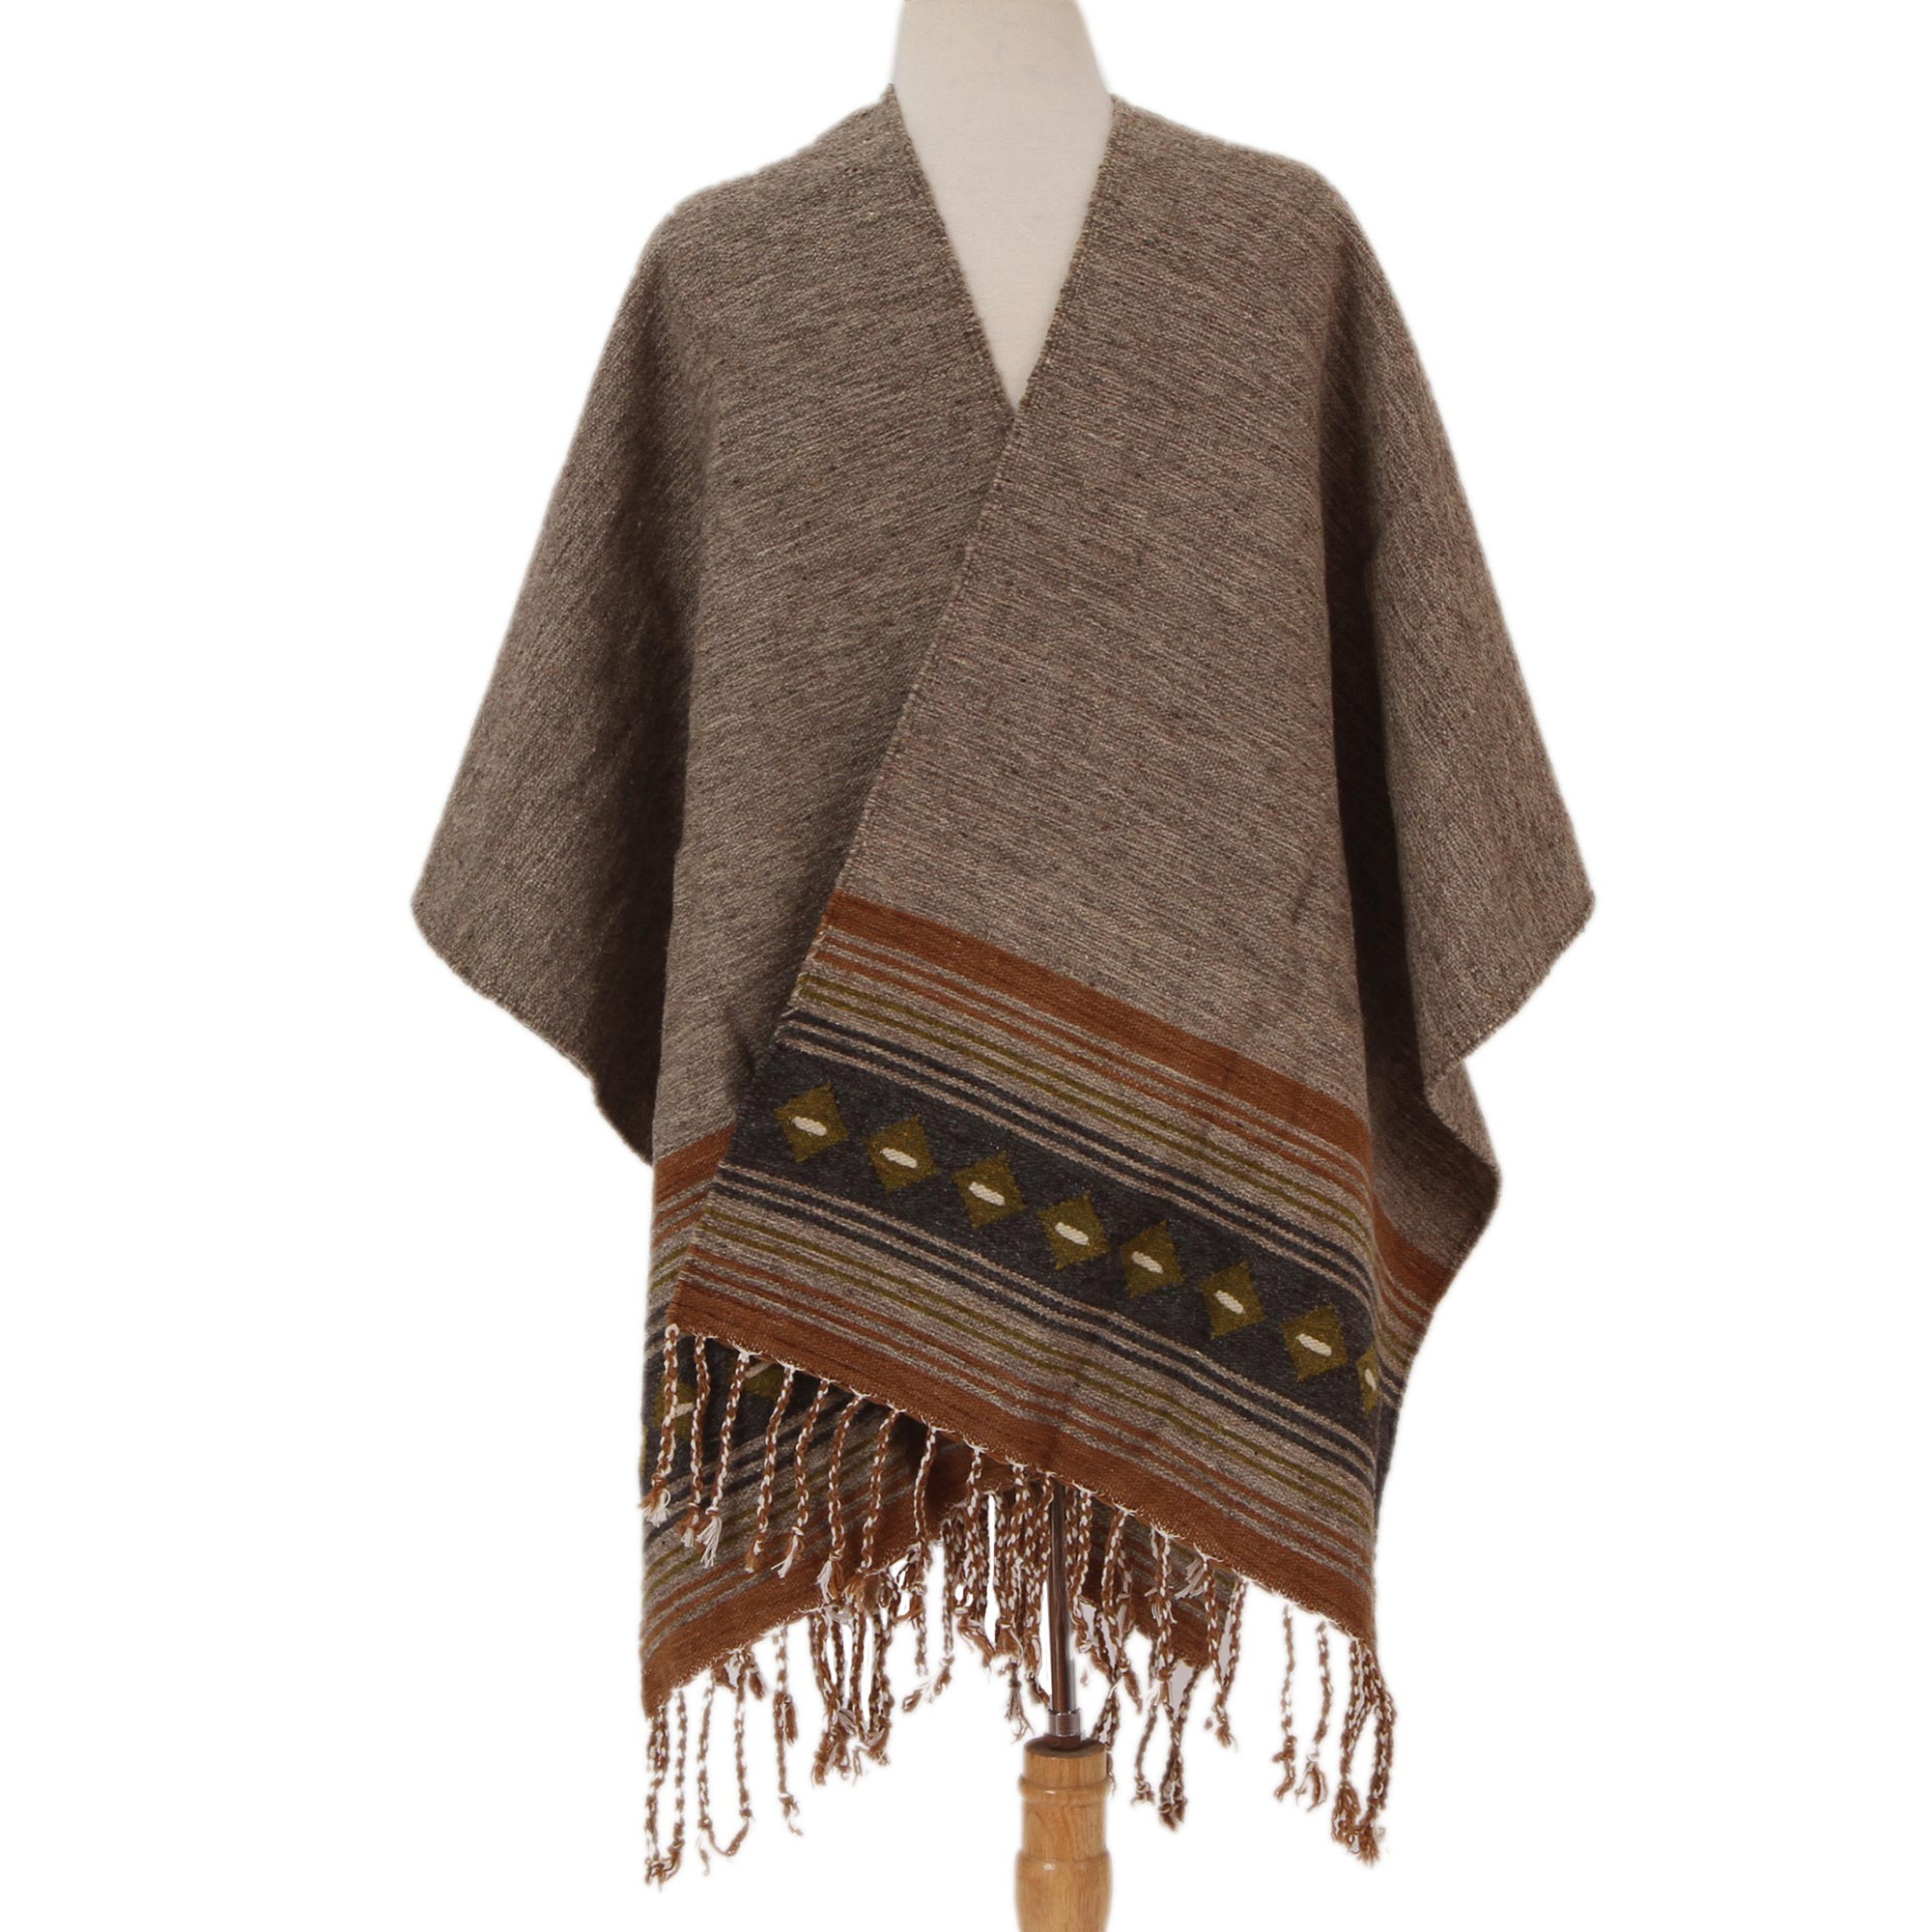 Handwoven Wool Blend Men's Ruana in Sand from Mexico - Sandy Landscape ...